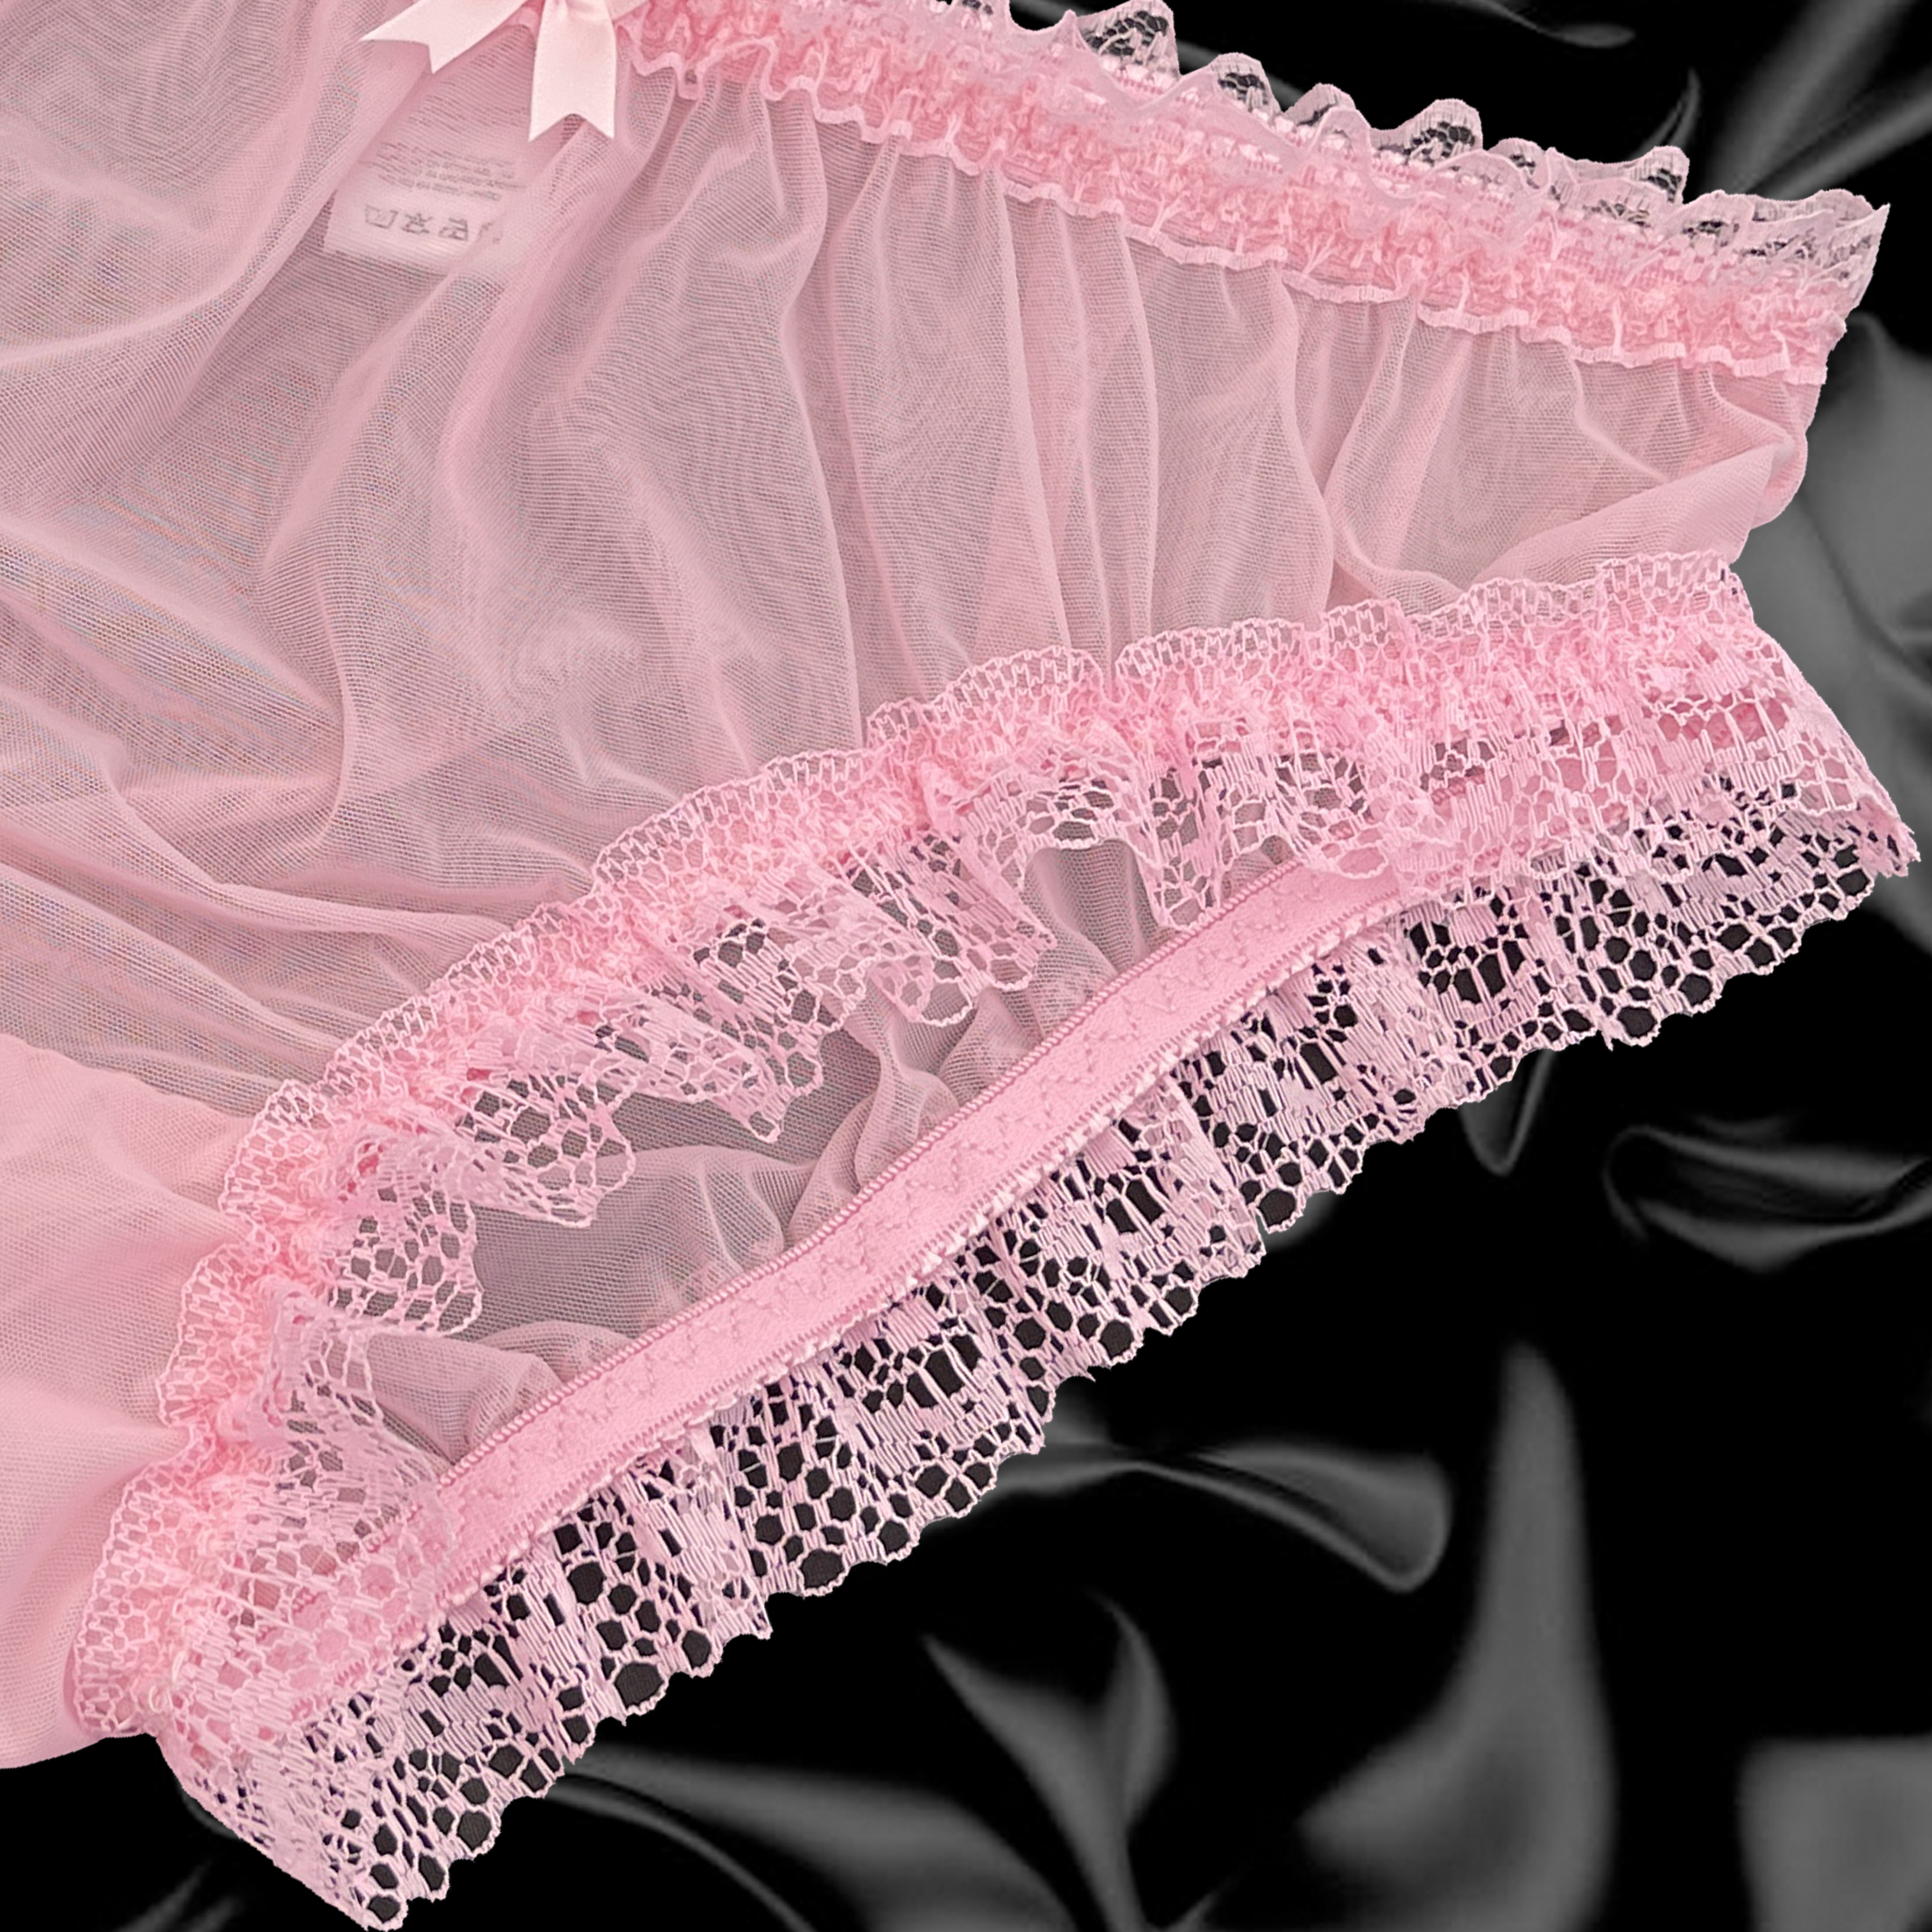 BABY PINK SOFT Nylon Sissy Sheer Frilly Lace Briefs Panties Knickers Size 10-20  £15.99 - PicClick UK